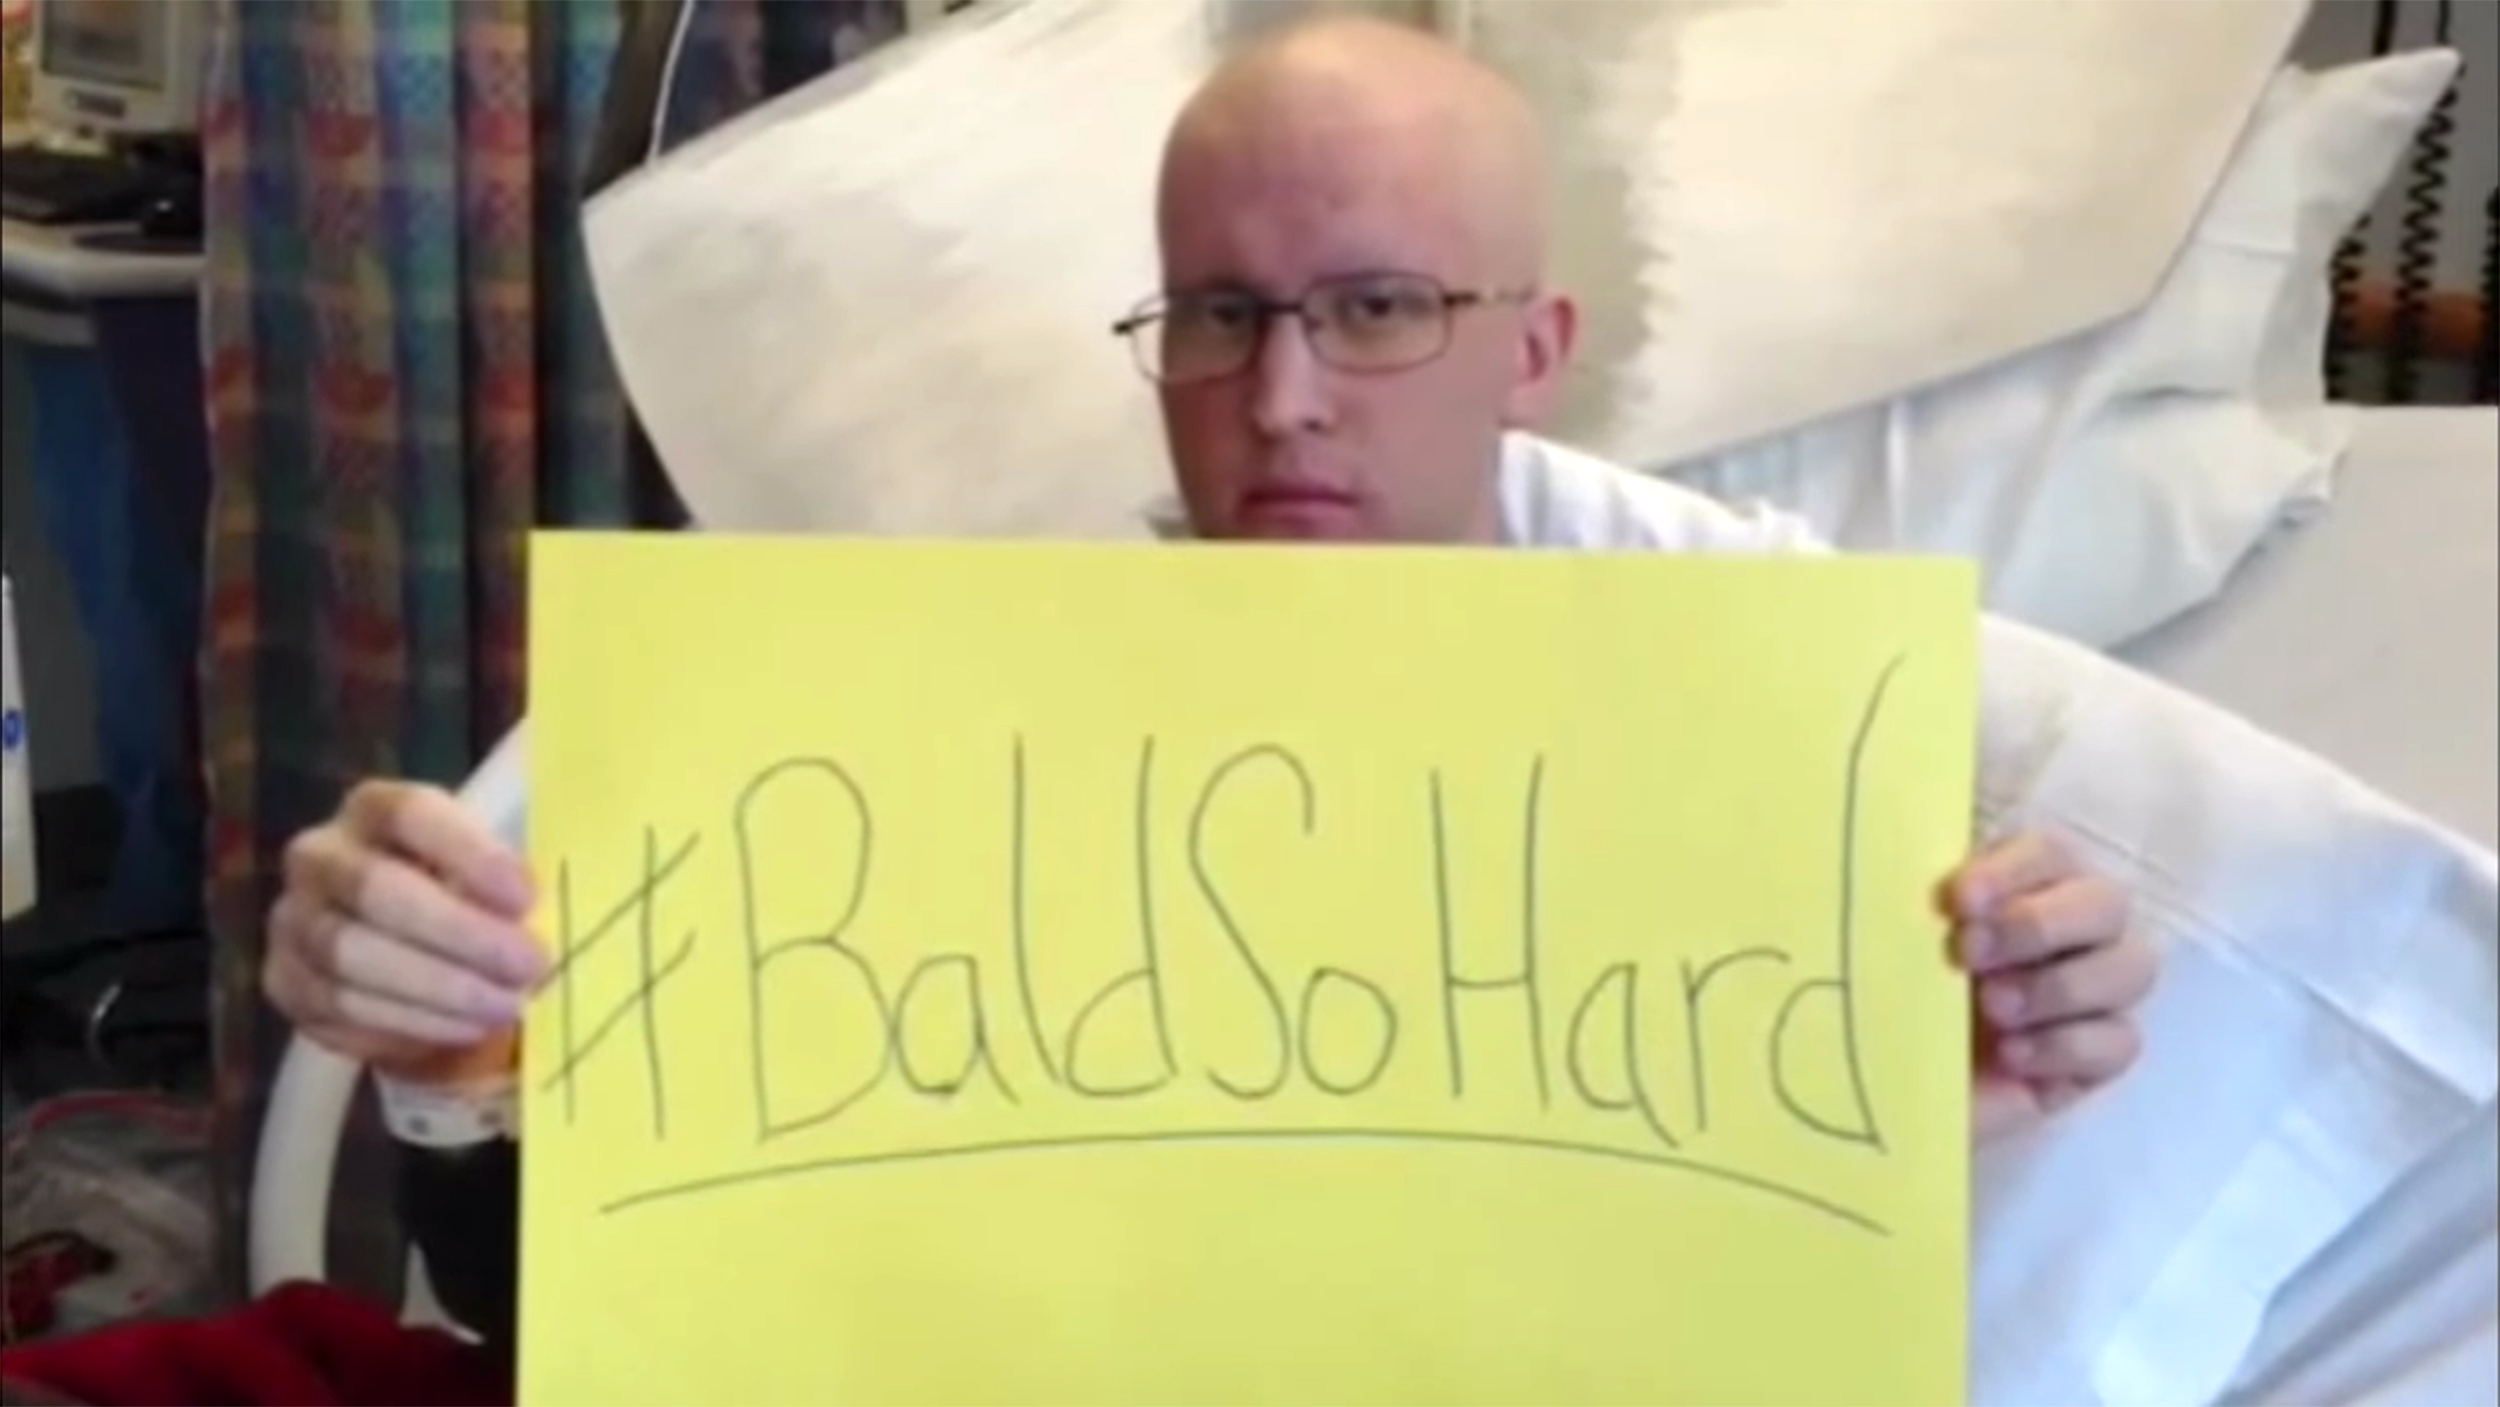 Bald So Hard': Cancer patient channels Jay-Z in funny rap video